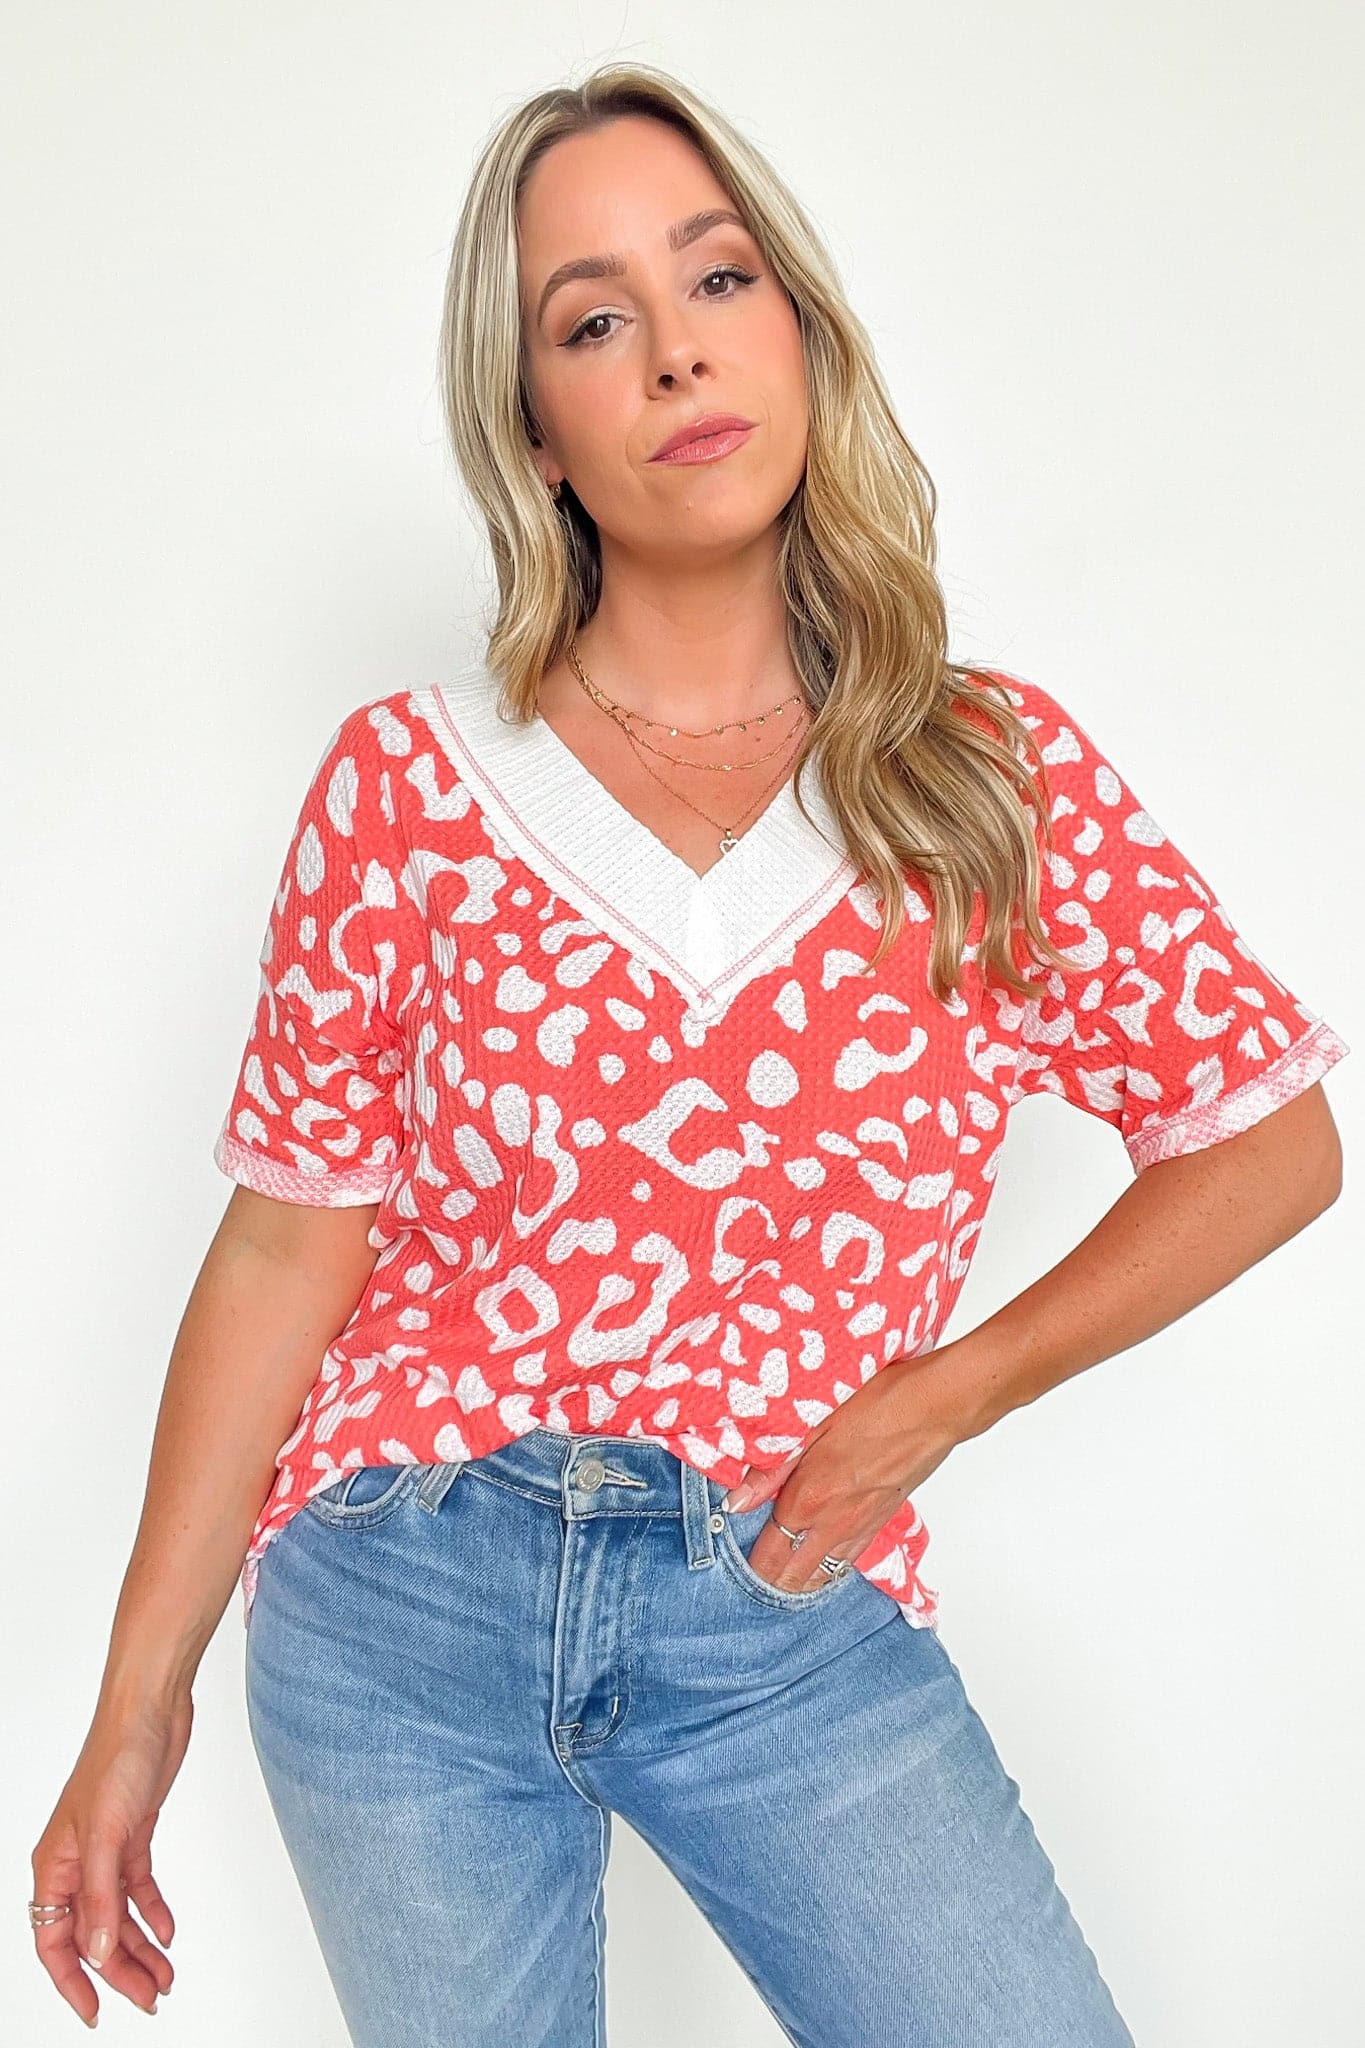  Terrasen V-Neck Animal Print Color Block Top - FINAL SALE - Madison and Mallory